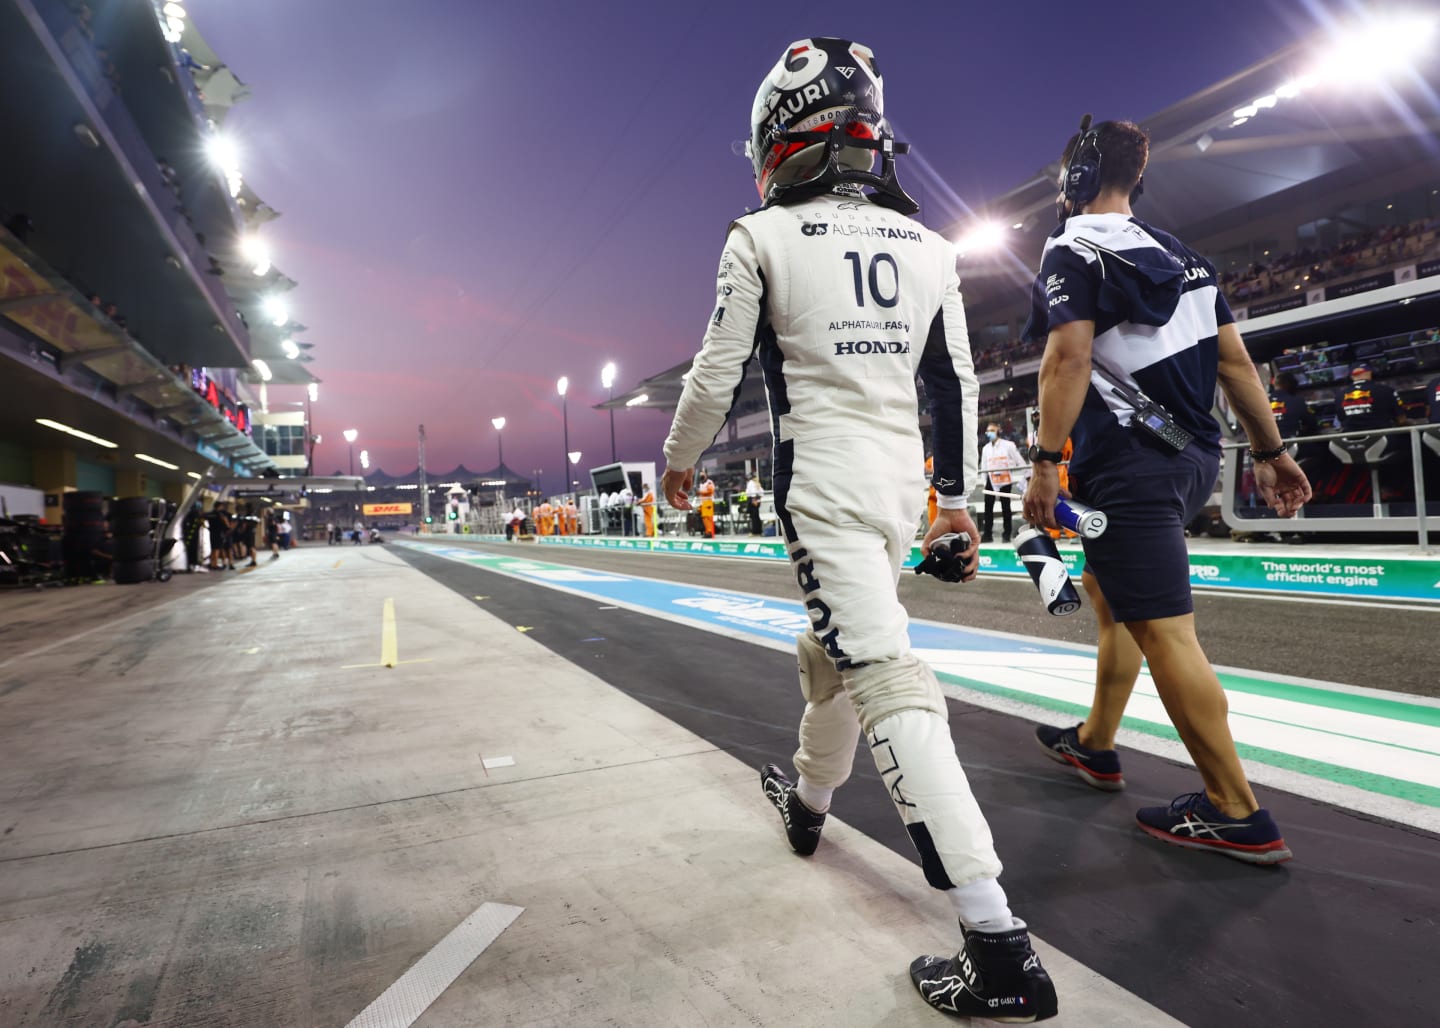 ABU DHABI, UNITED ARAB EMIRATES - DECEMBER 11: Pierre Gasly of France and Scuderia AlphaTauri walks in the Pitlane during qualifying ahead of the F1 Grand Prix of Abu Dhabi at Yas Marina Circuit on December 11, 2021 in Abu Dhabi, United Arab Emirates. (Photo by Mark Thompson/Getty Images)